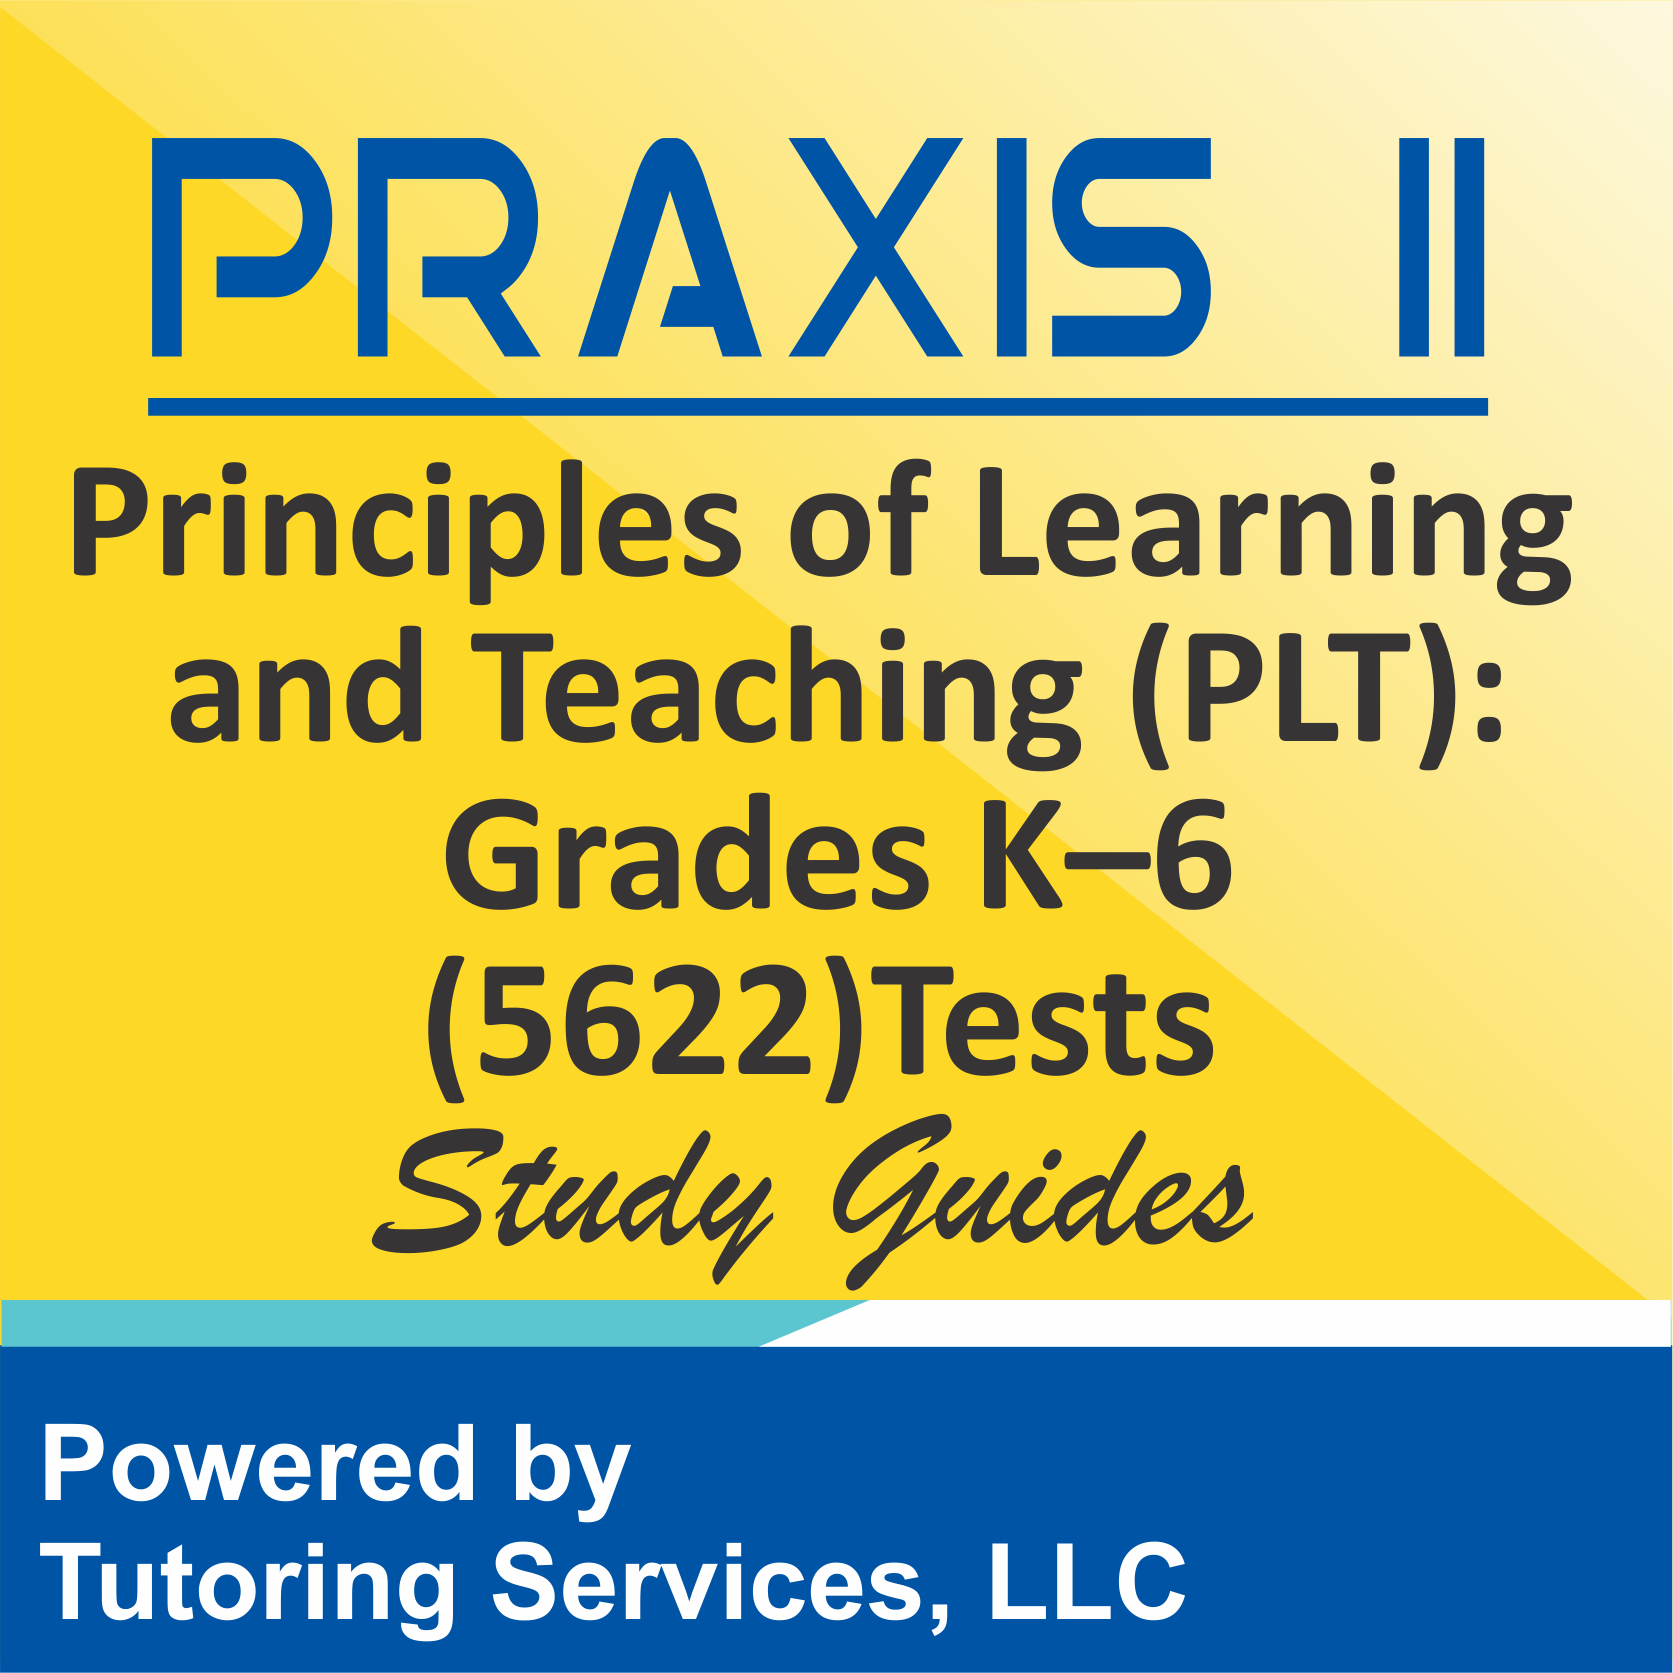 Praxis II Principles of Learning and Teaching: Grades K-6 (5622) Test